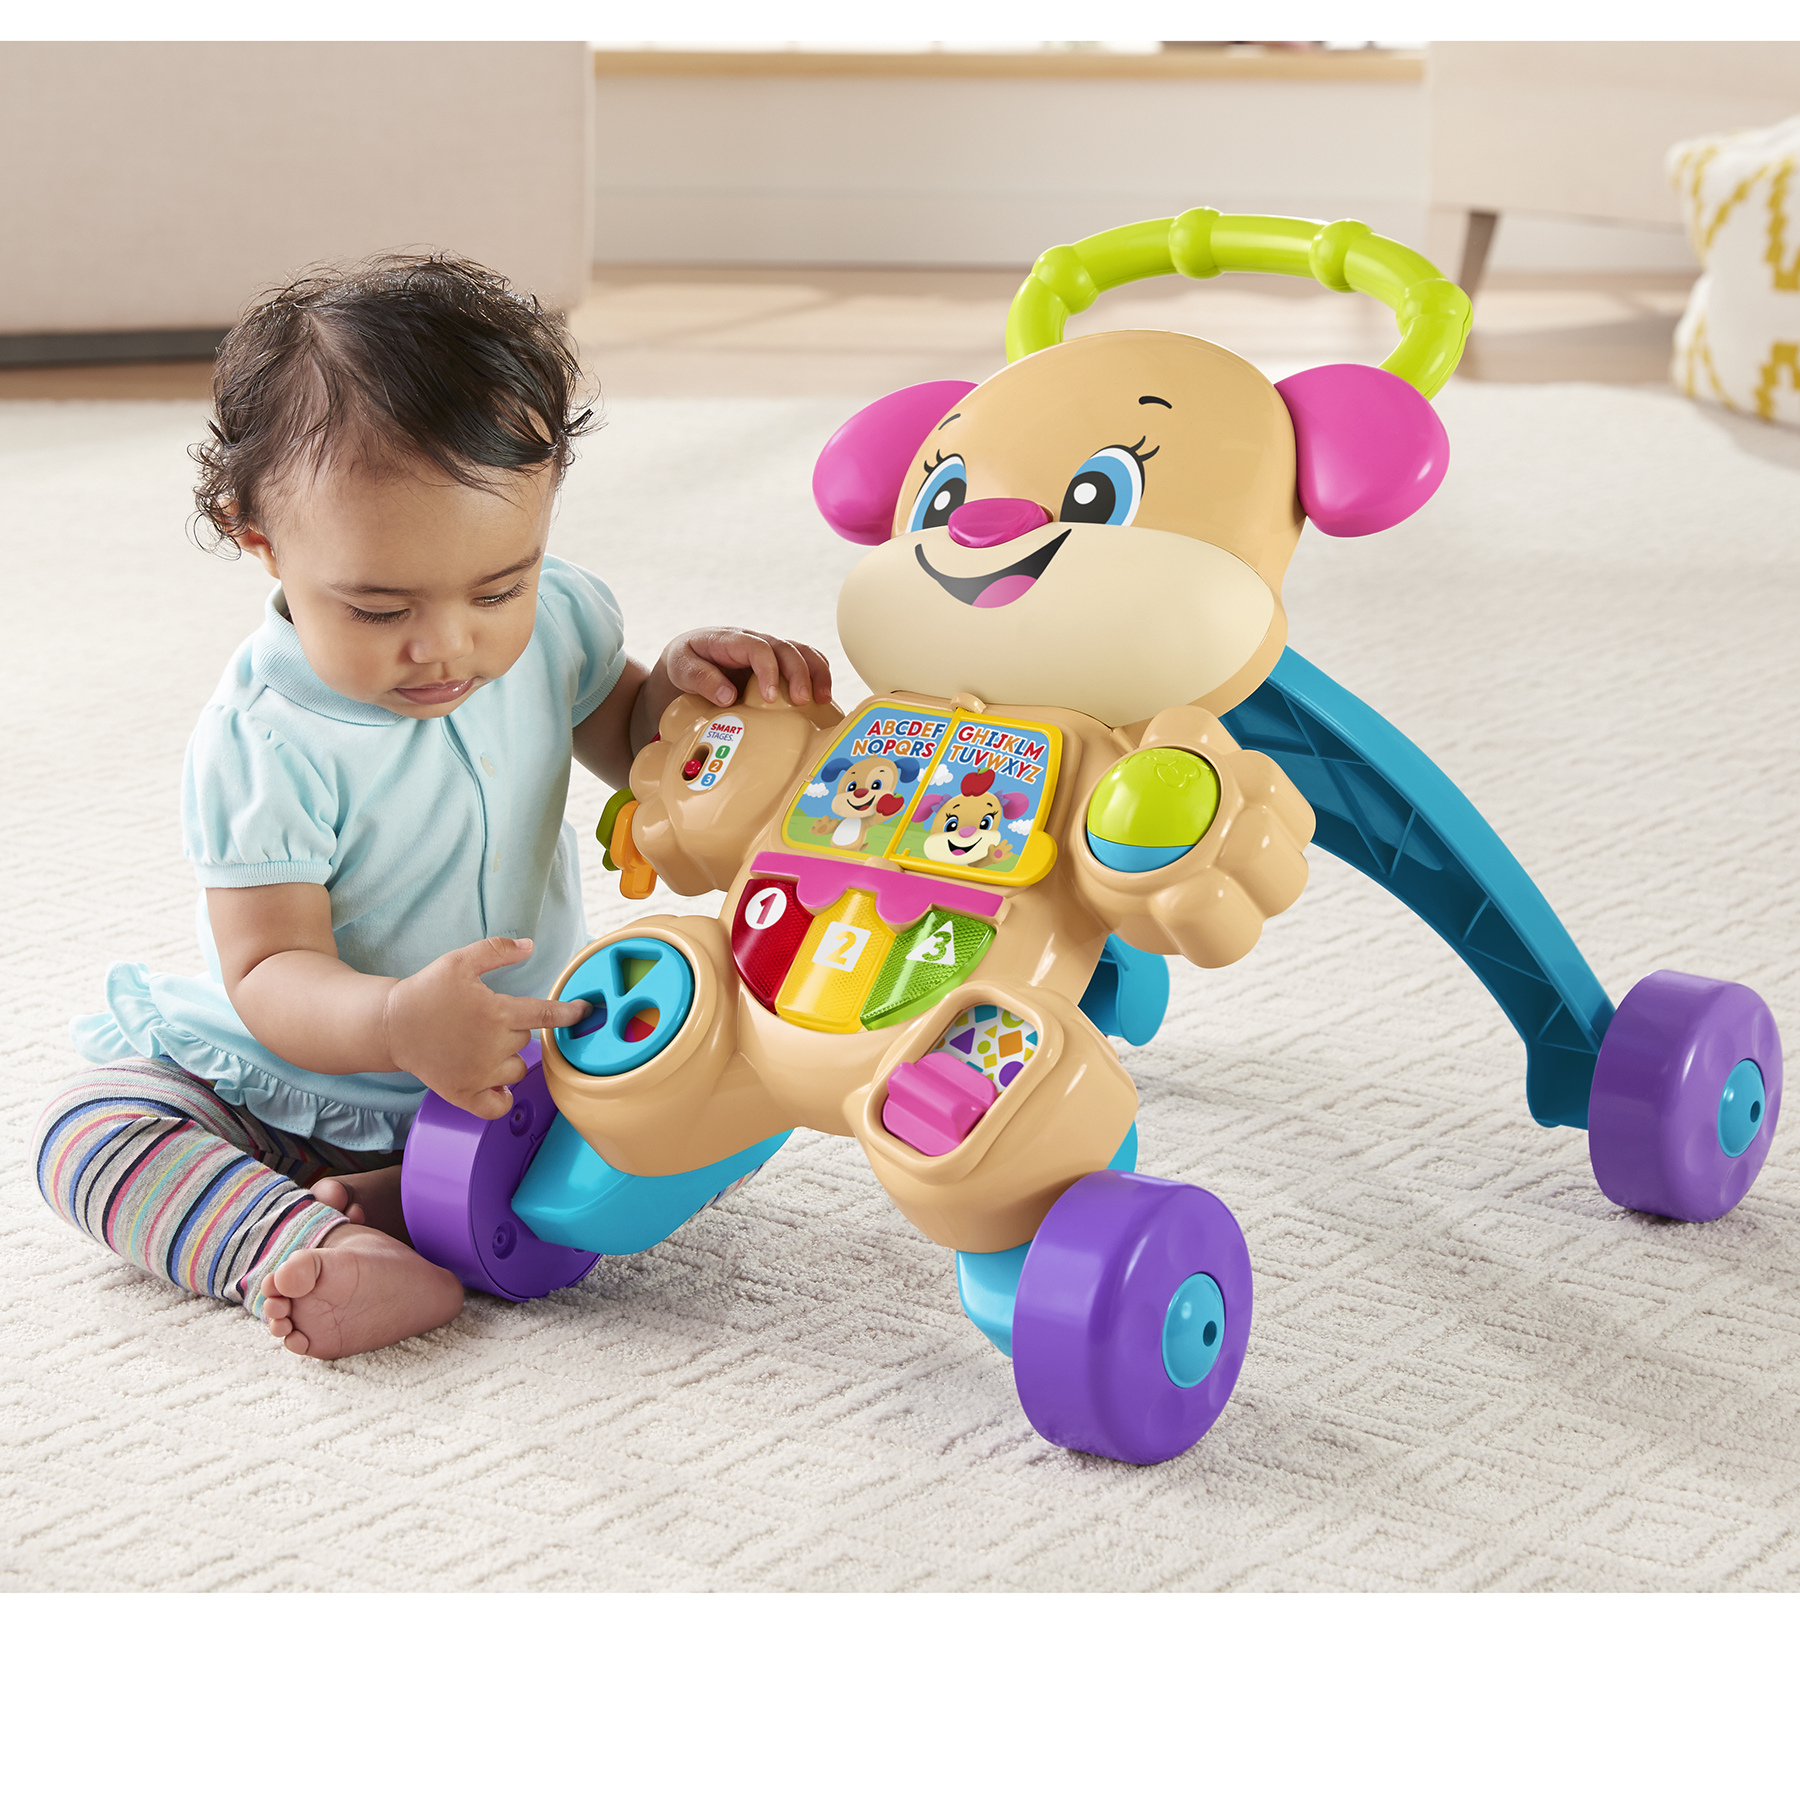 Laugh \u0026 Learn Fisher-Price Smart Stages 